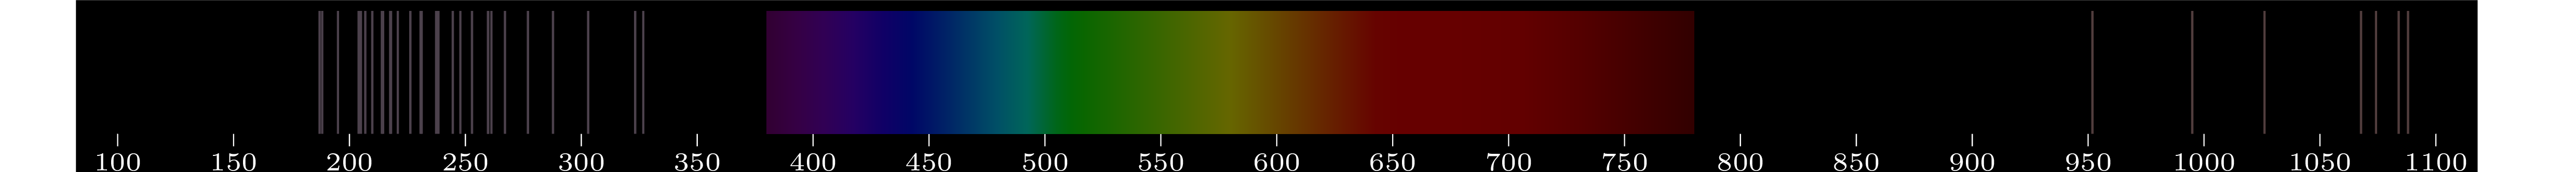 emmision spectra of element Sb